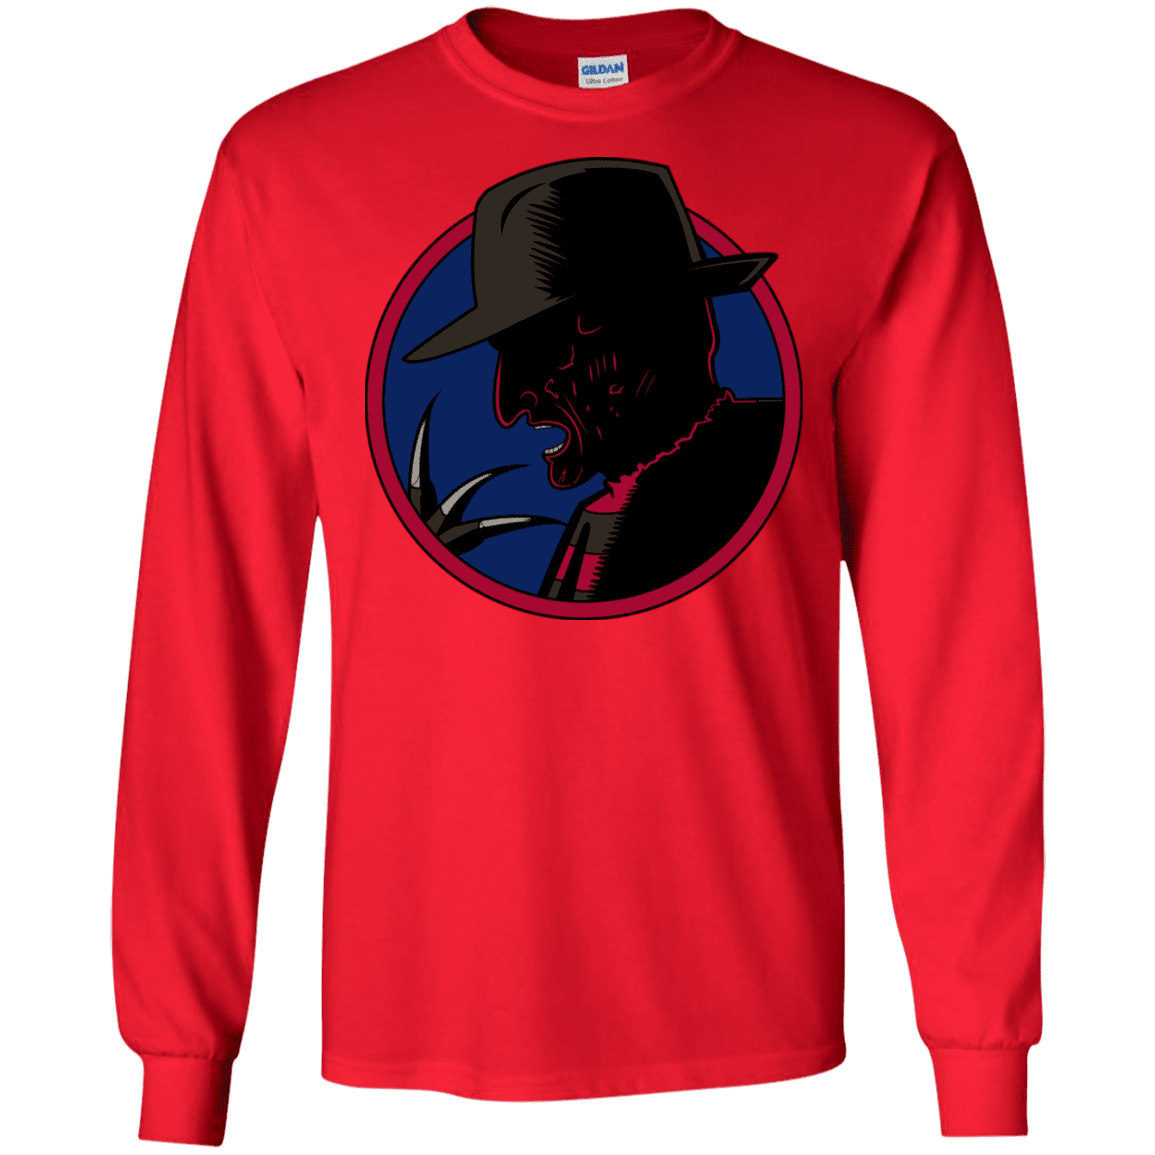 T-Shirts Red / S Tracy Nightmare Men's Long Sleeve T-Shirt